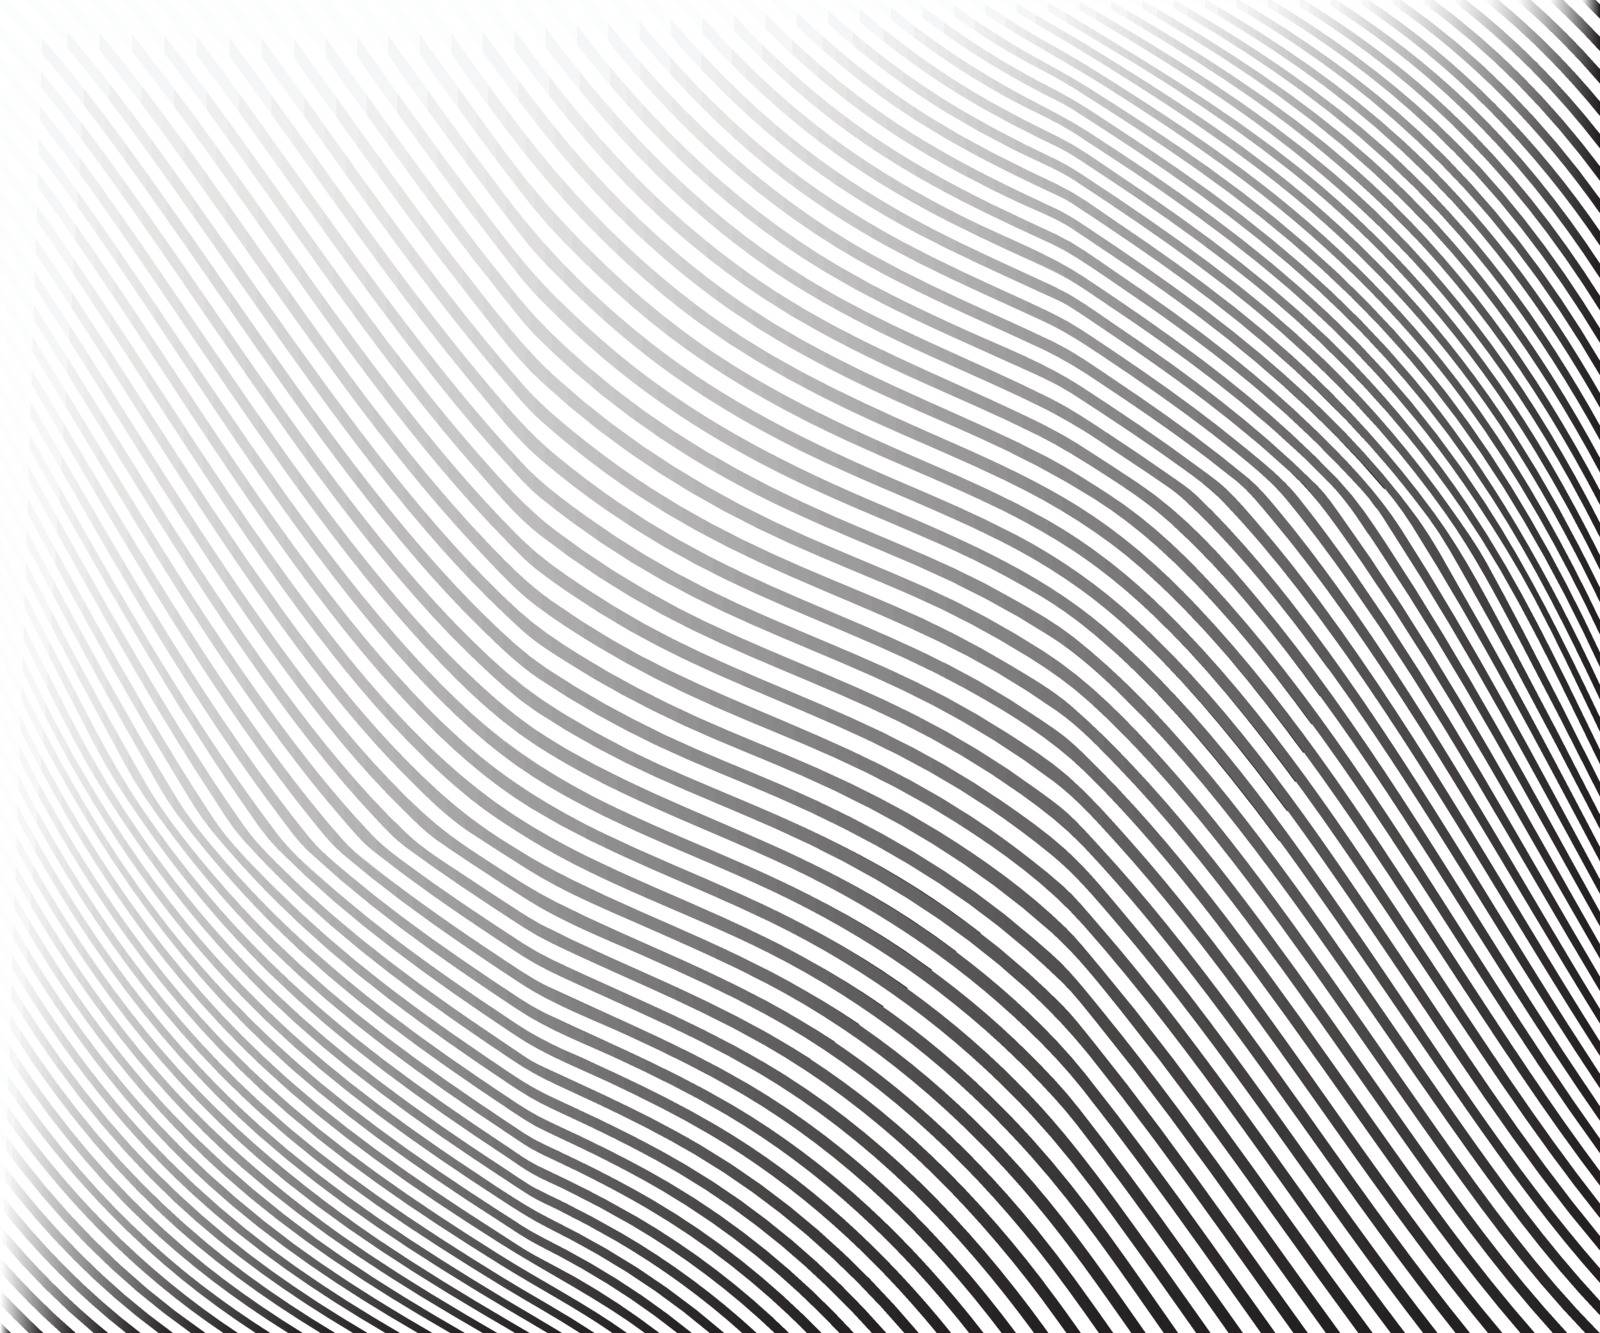 Wave Stripe Background - simple texture for your design. EPS10 v by Rodseng